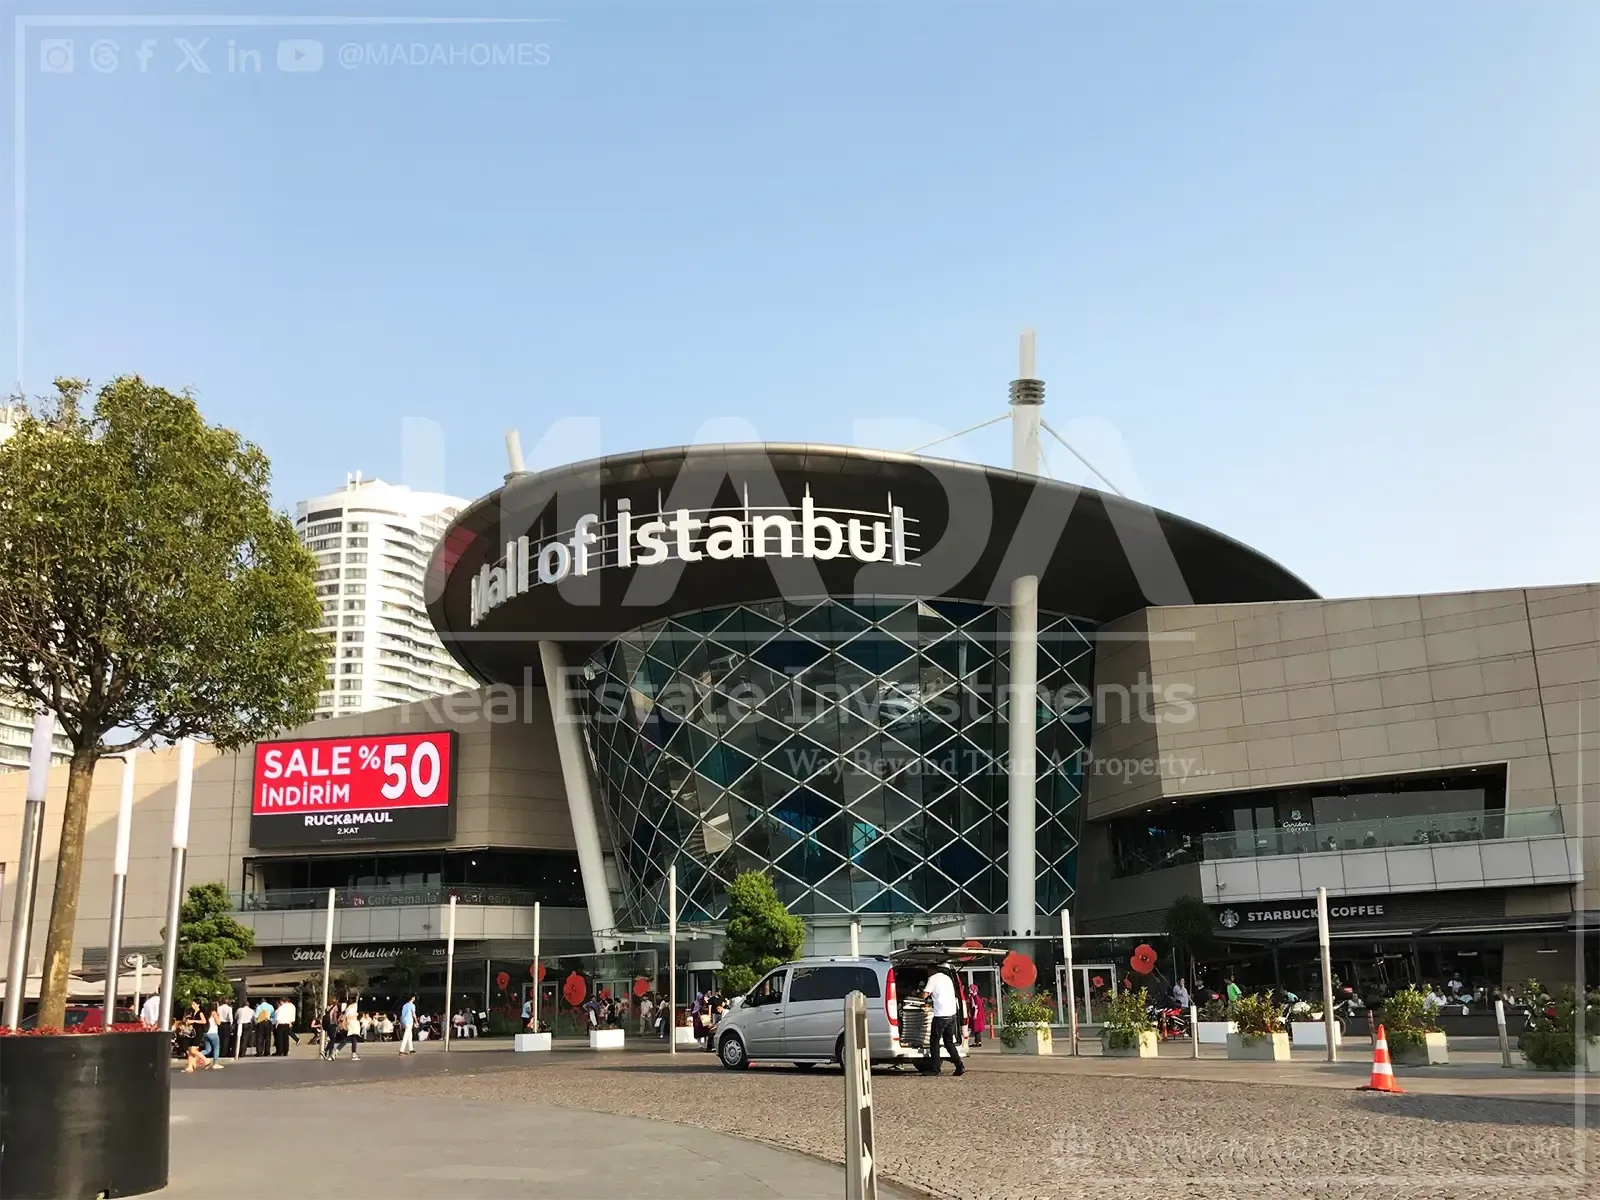 Mall Of Istanbul